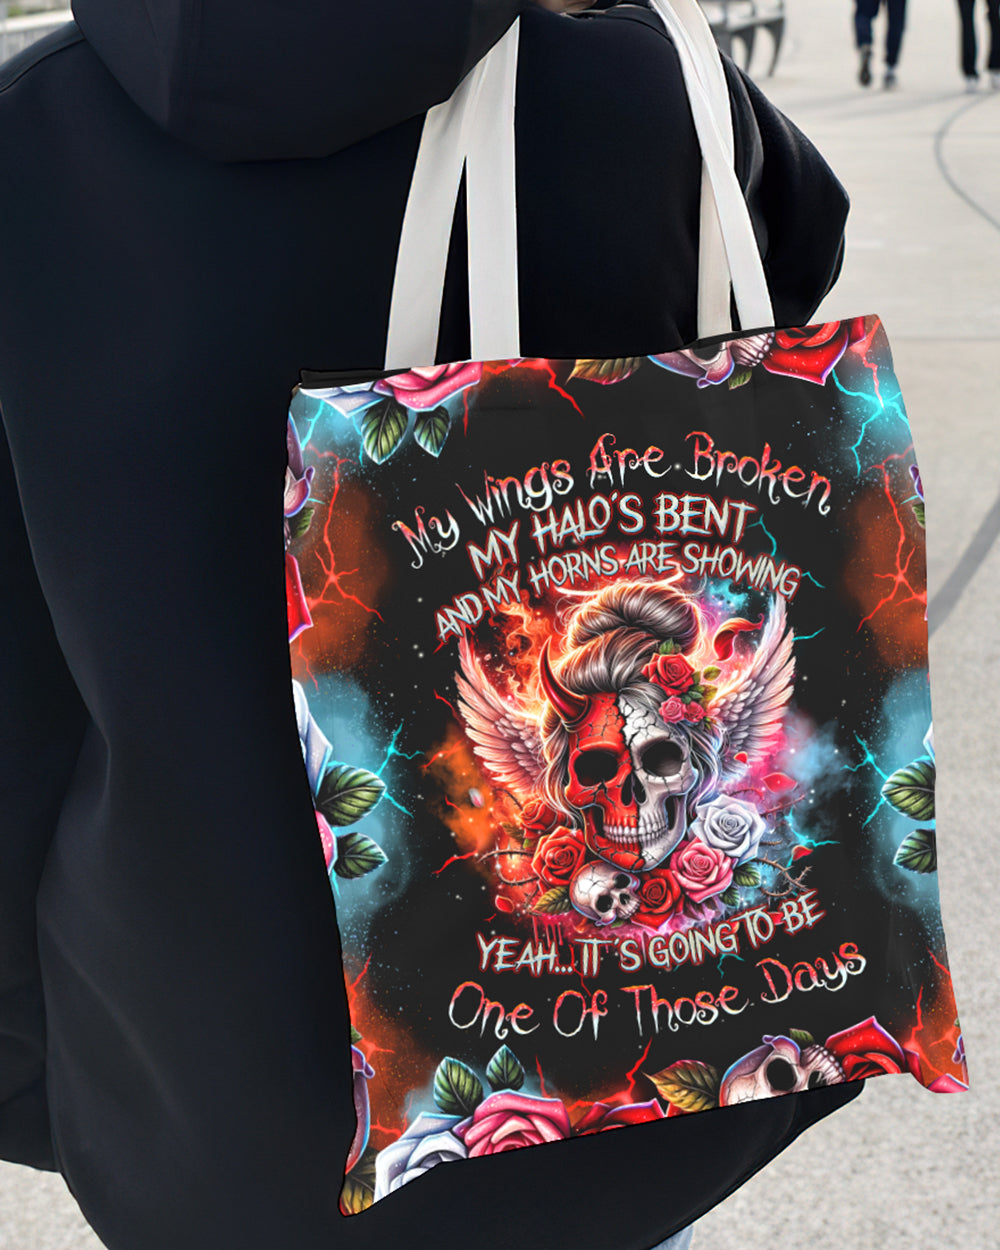 IT'S GOING TO BE ONE OF THOSE DAYS TOTE BAG - TYQY2703246